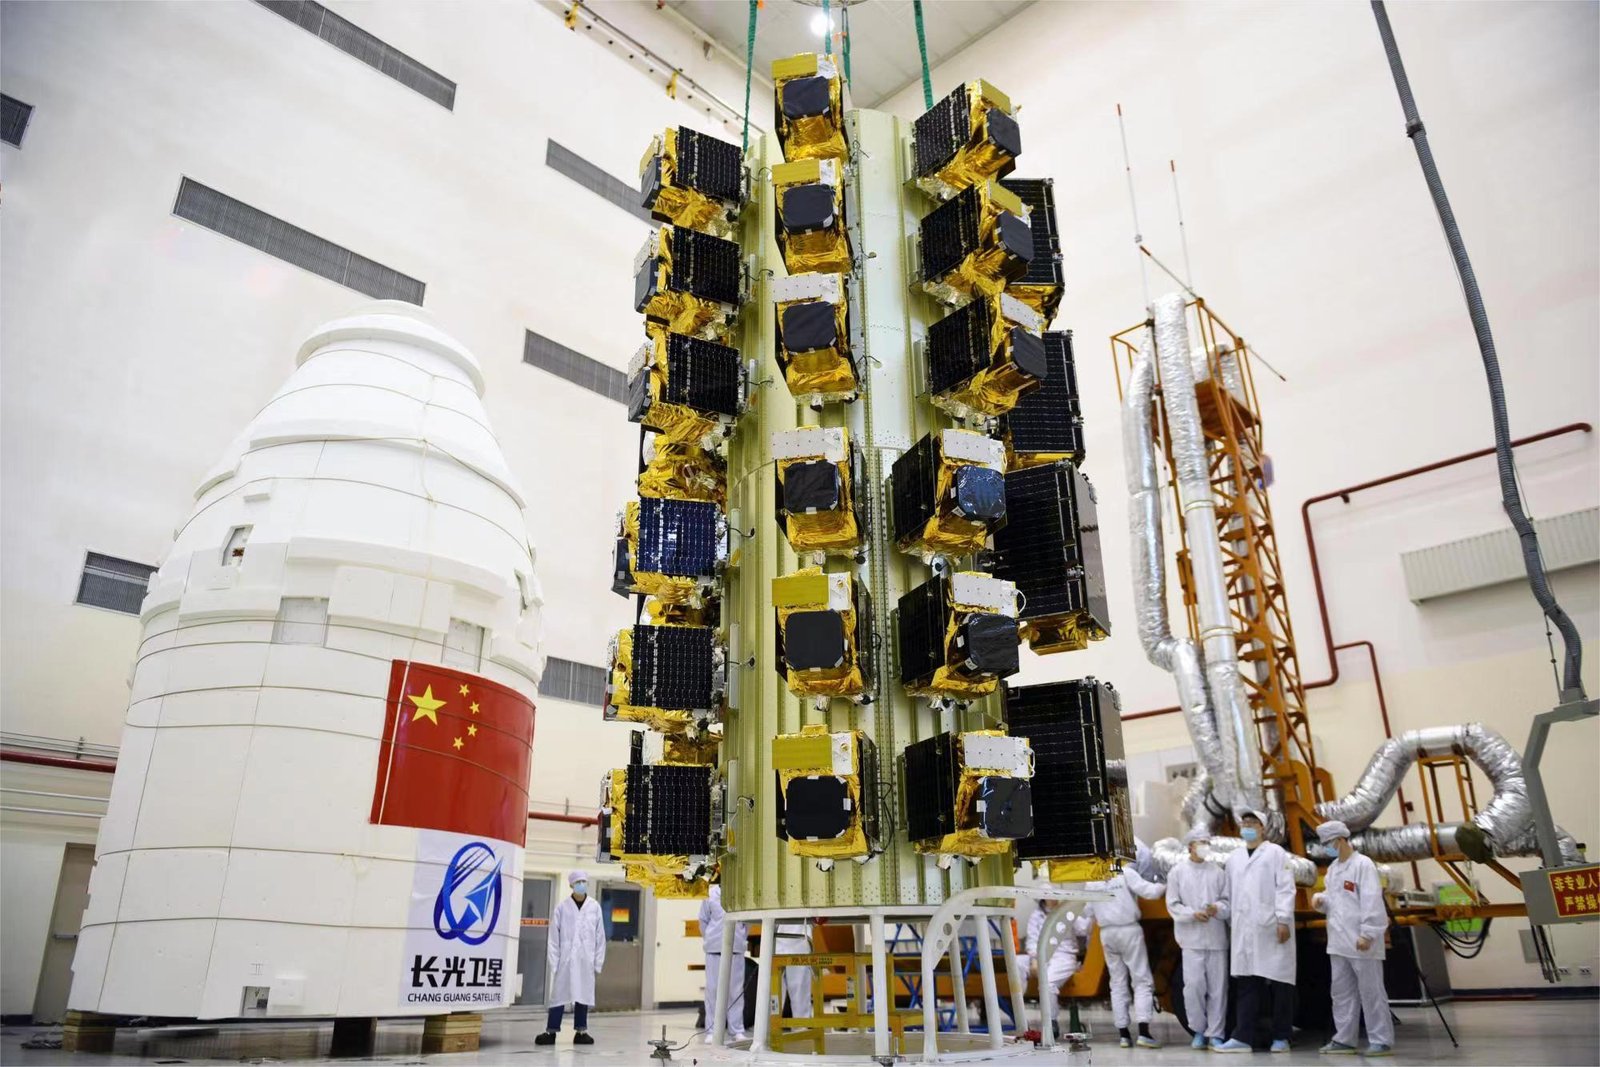 HKUST To Launch Multispectral Satellite With Chang Guang On August 25